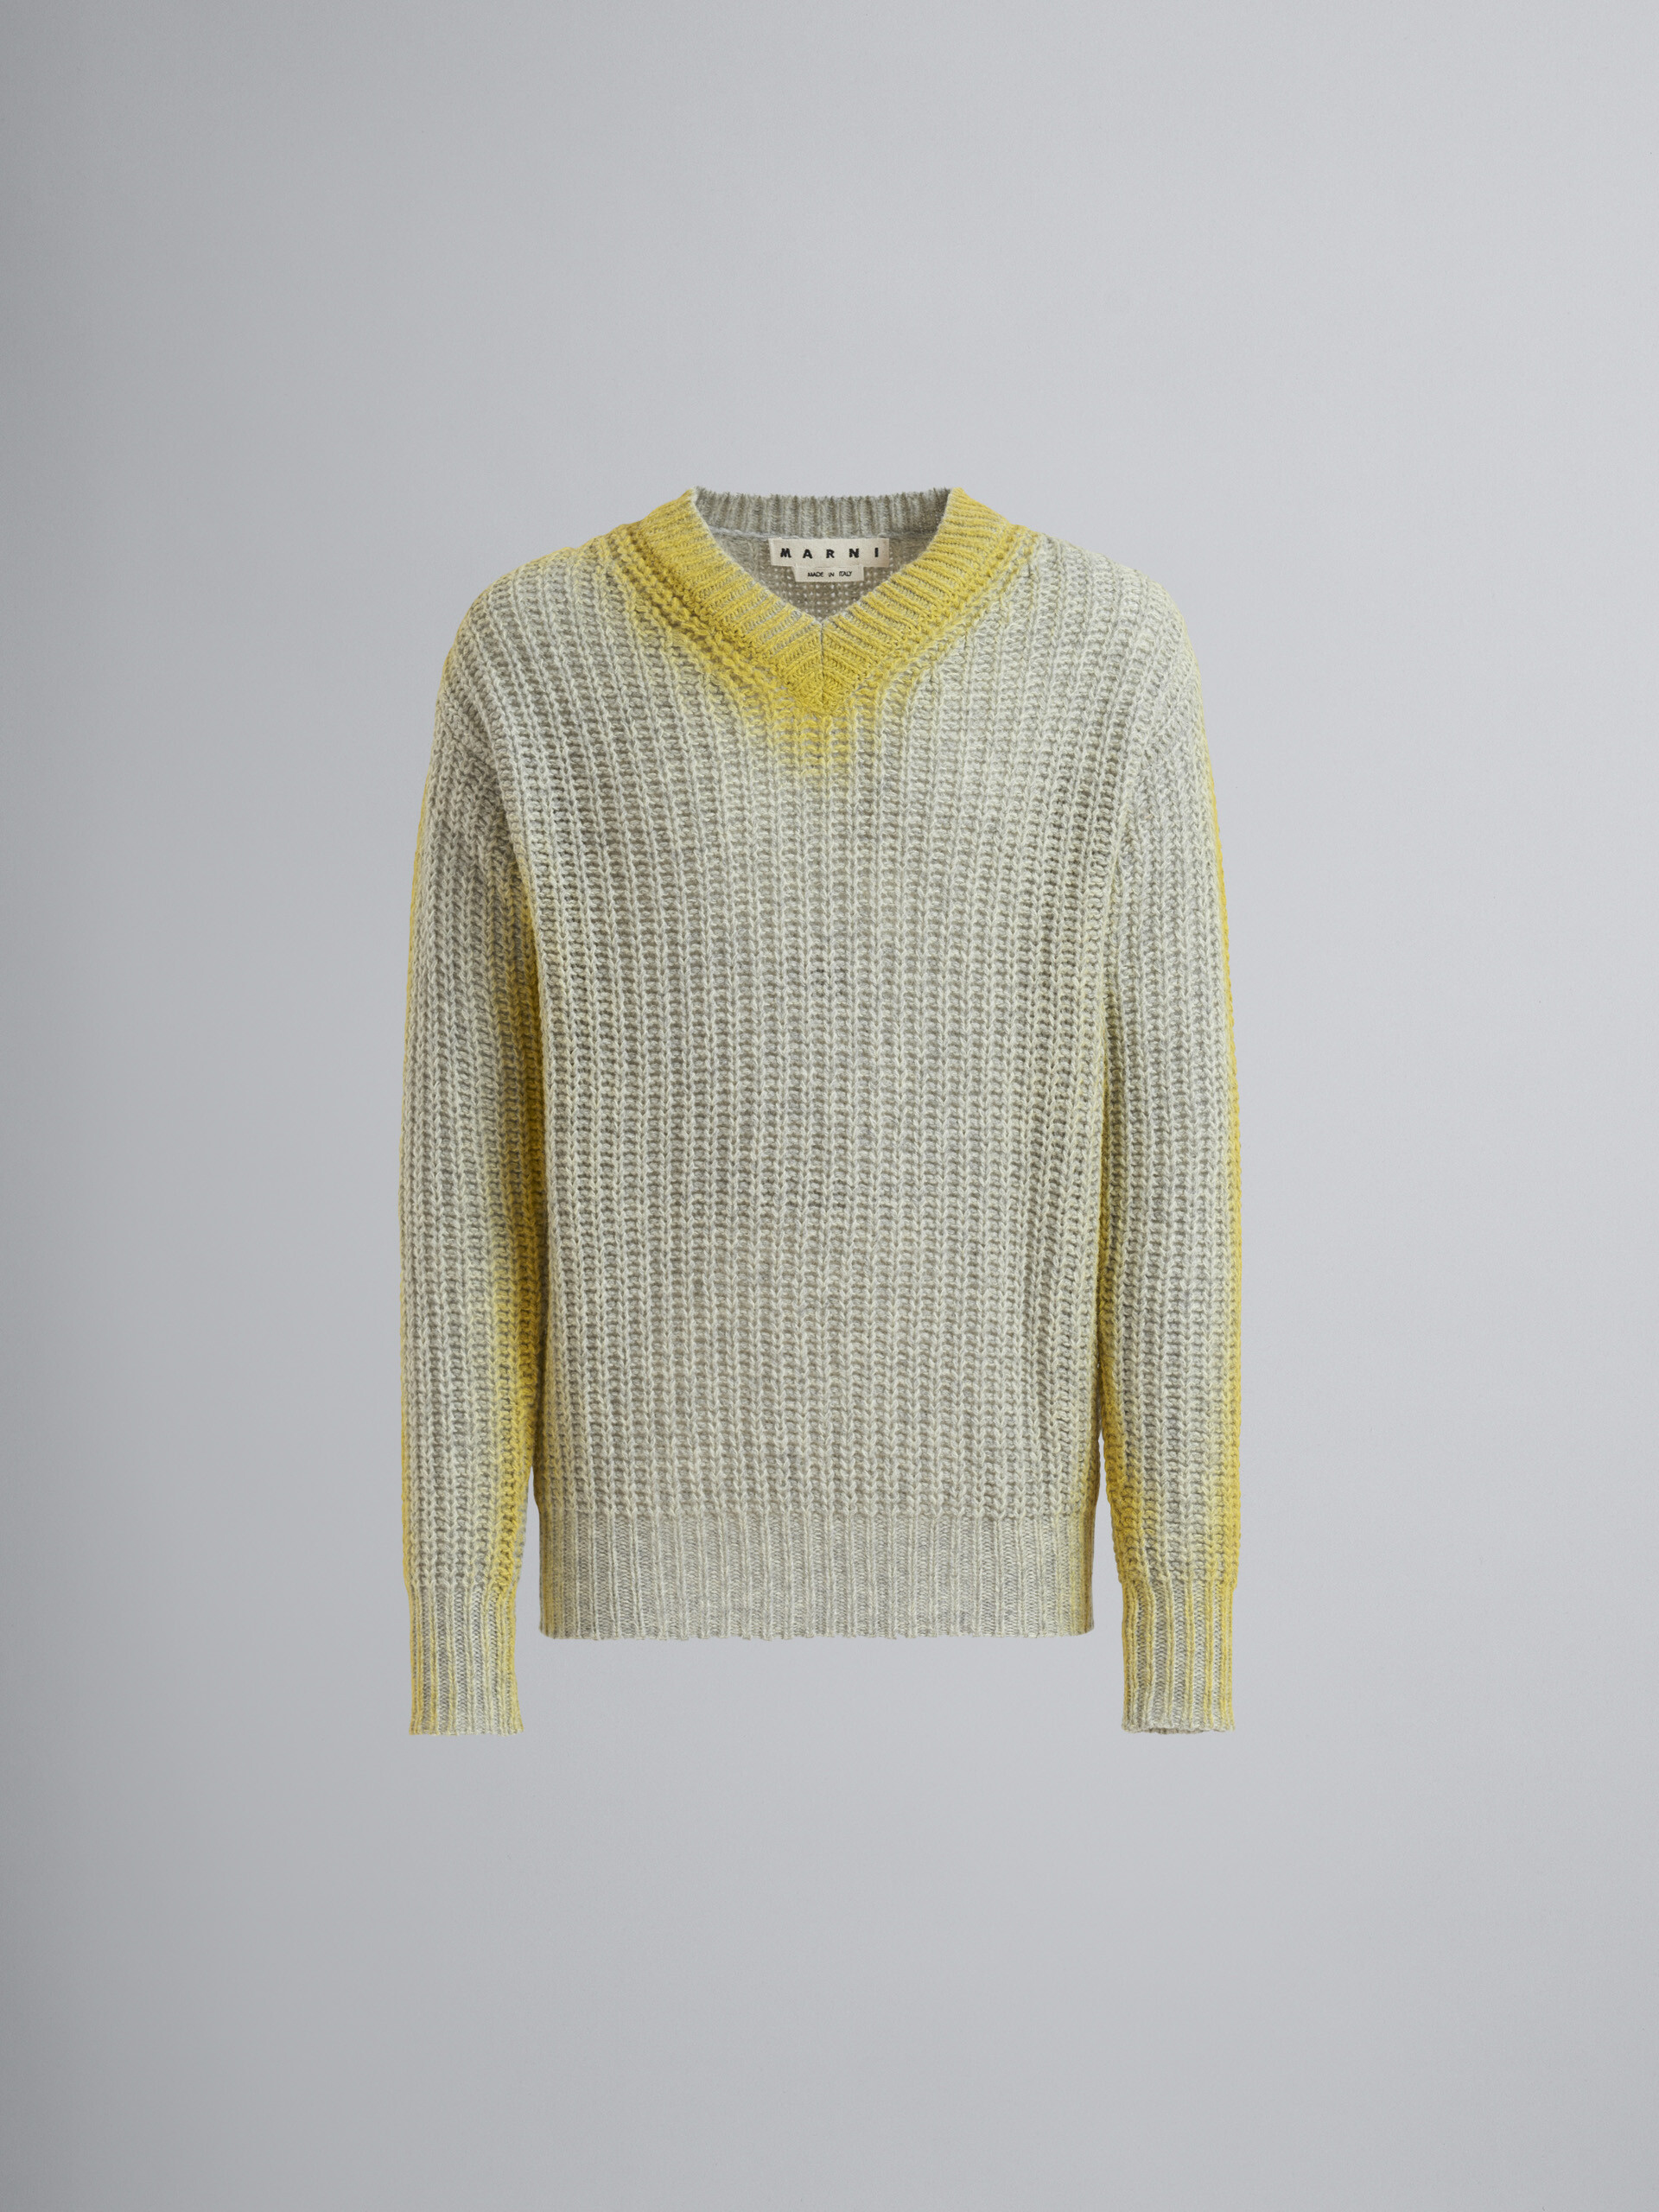 Mouliné Shetland wool sweater with contrast-sprayed sleeves and neckline - Pullovers - Image 1